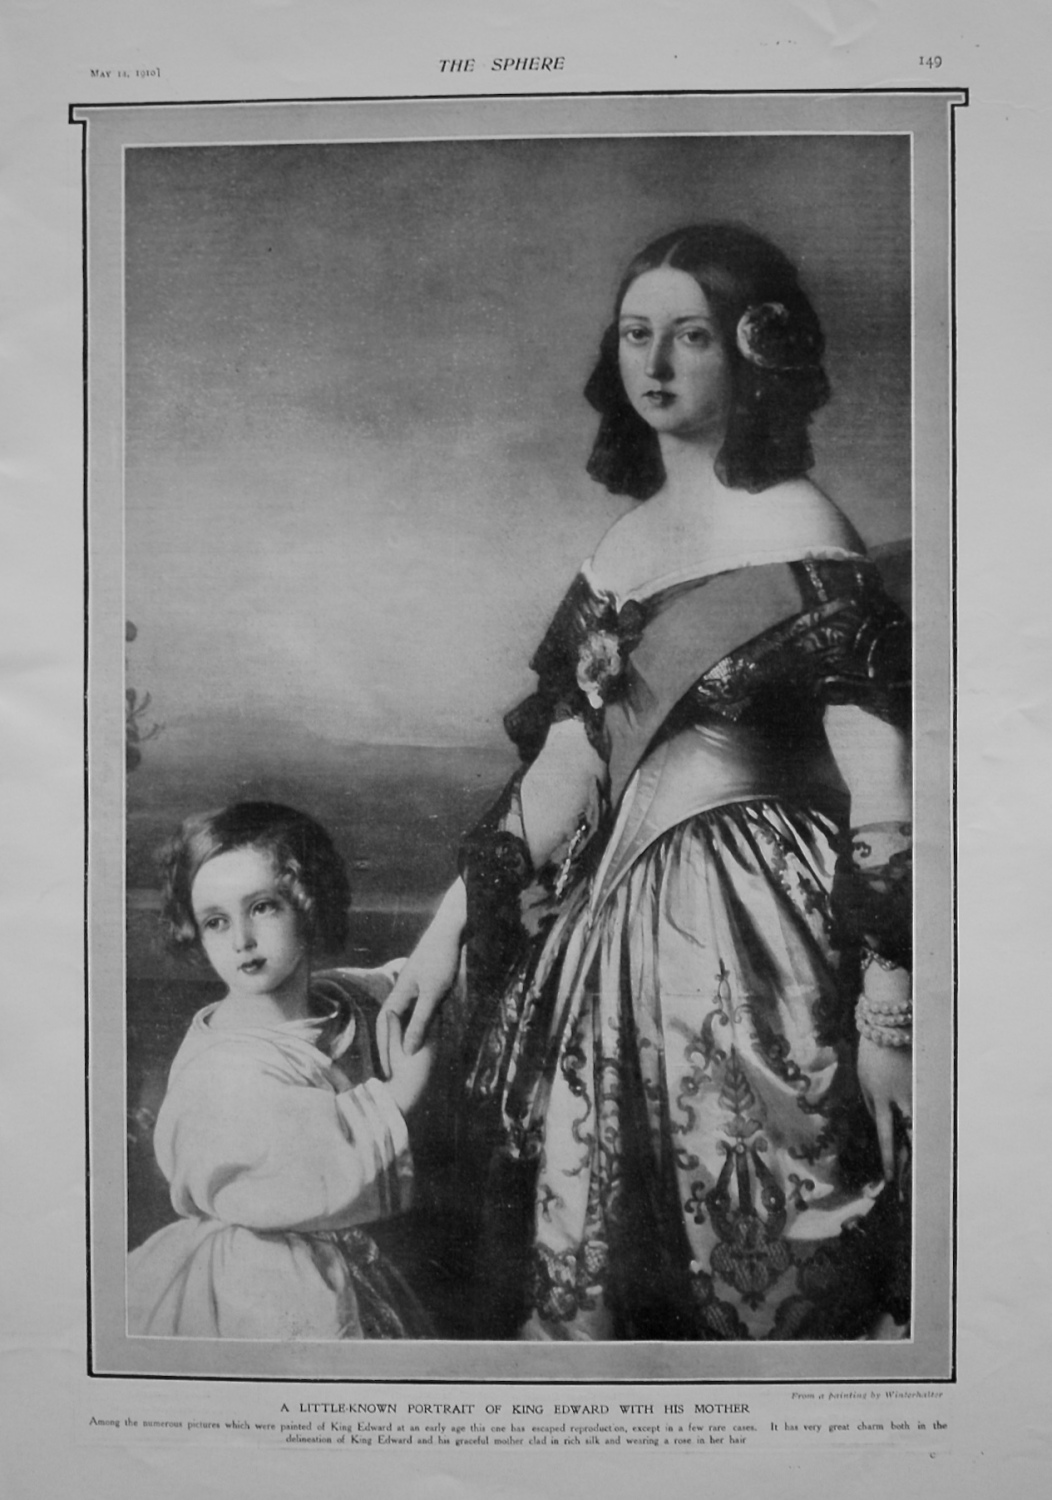 A Little-known Portrait of King Edward with His Mother. 